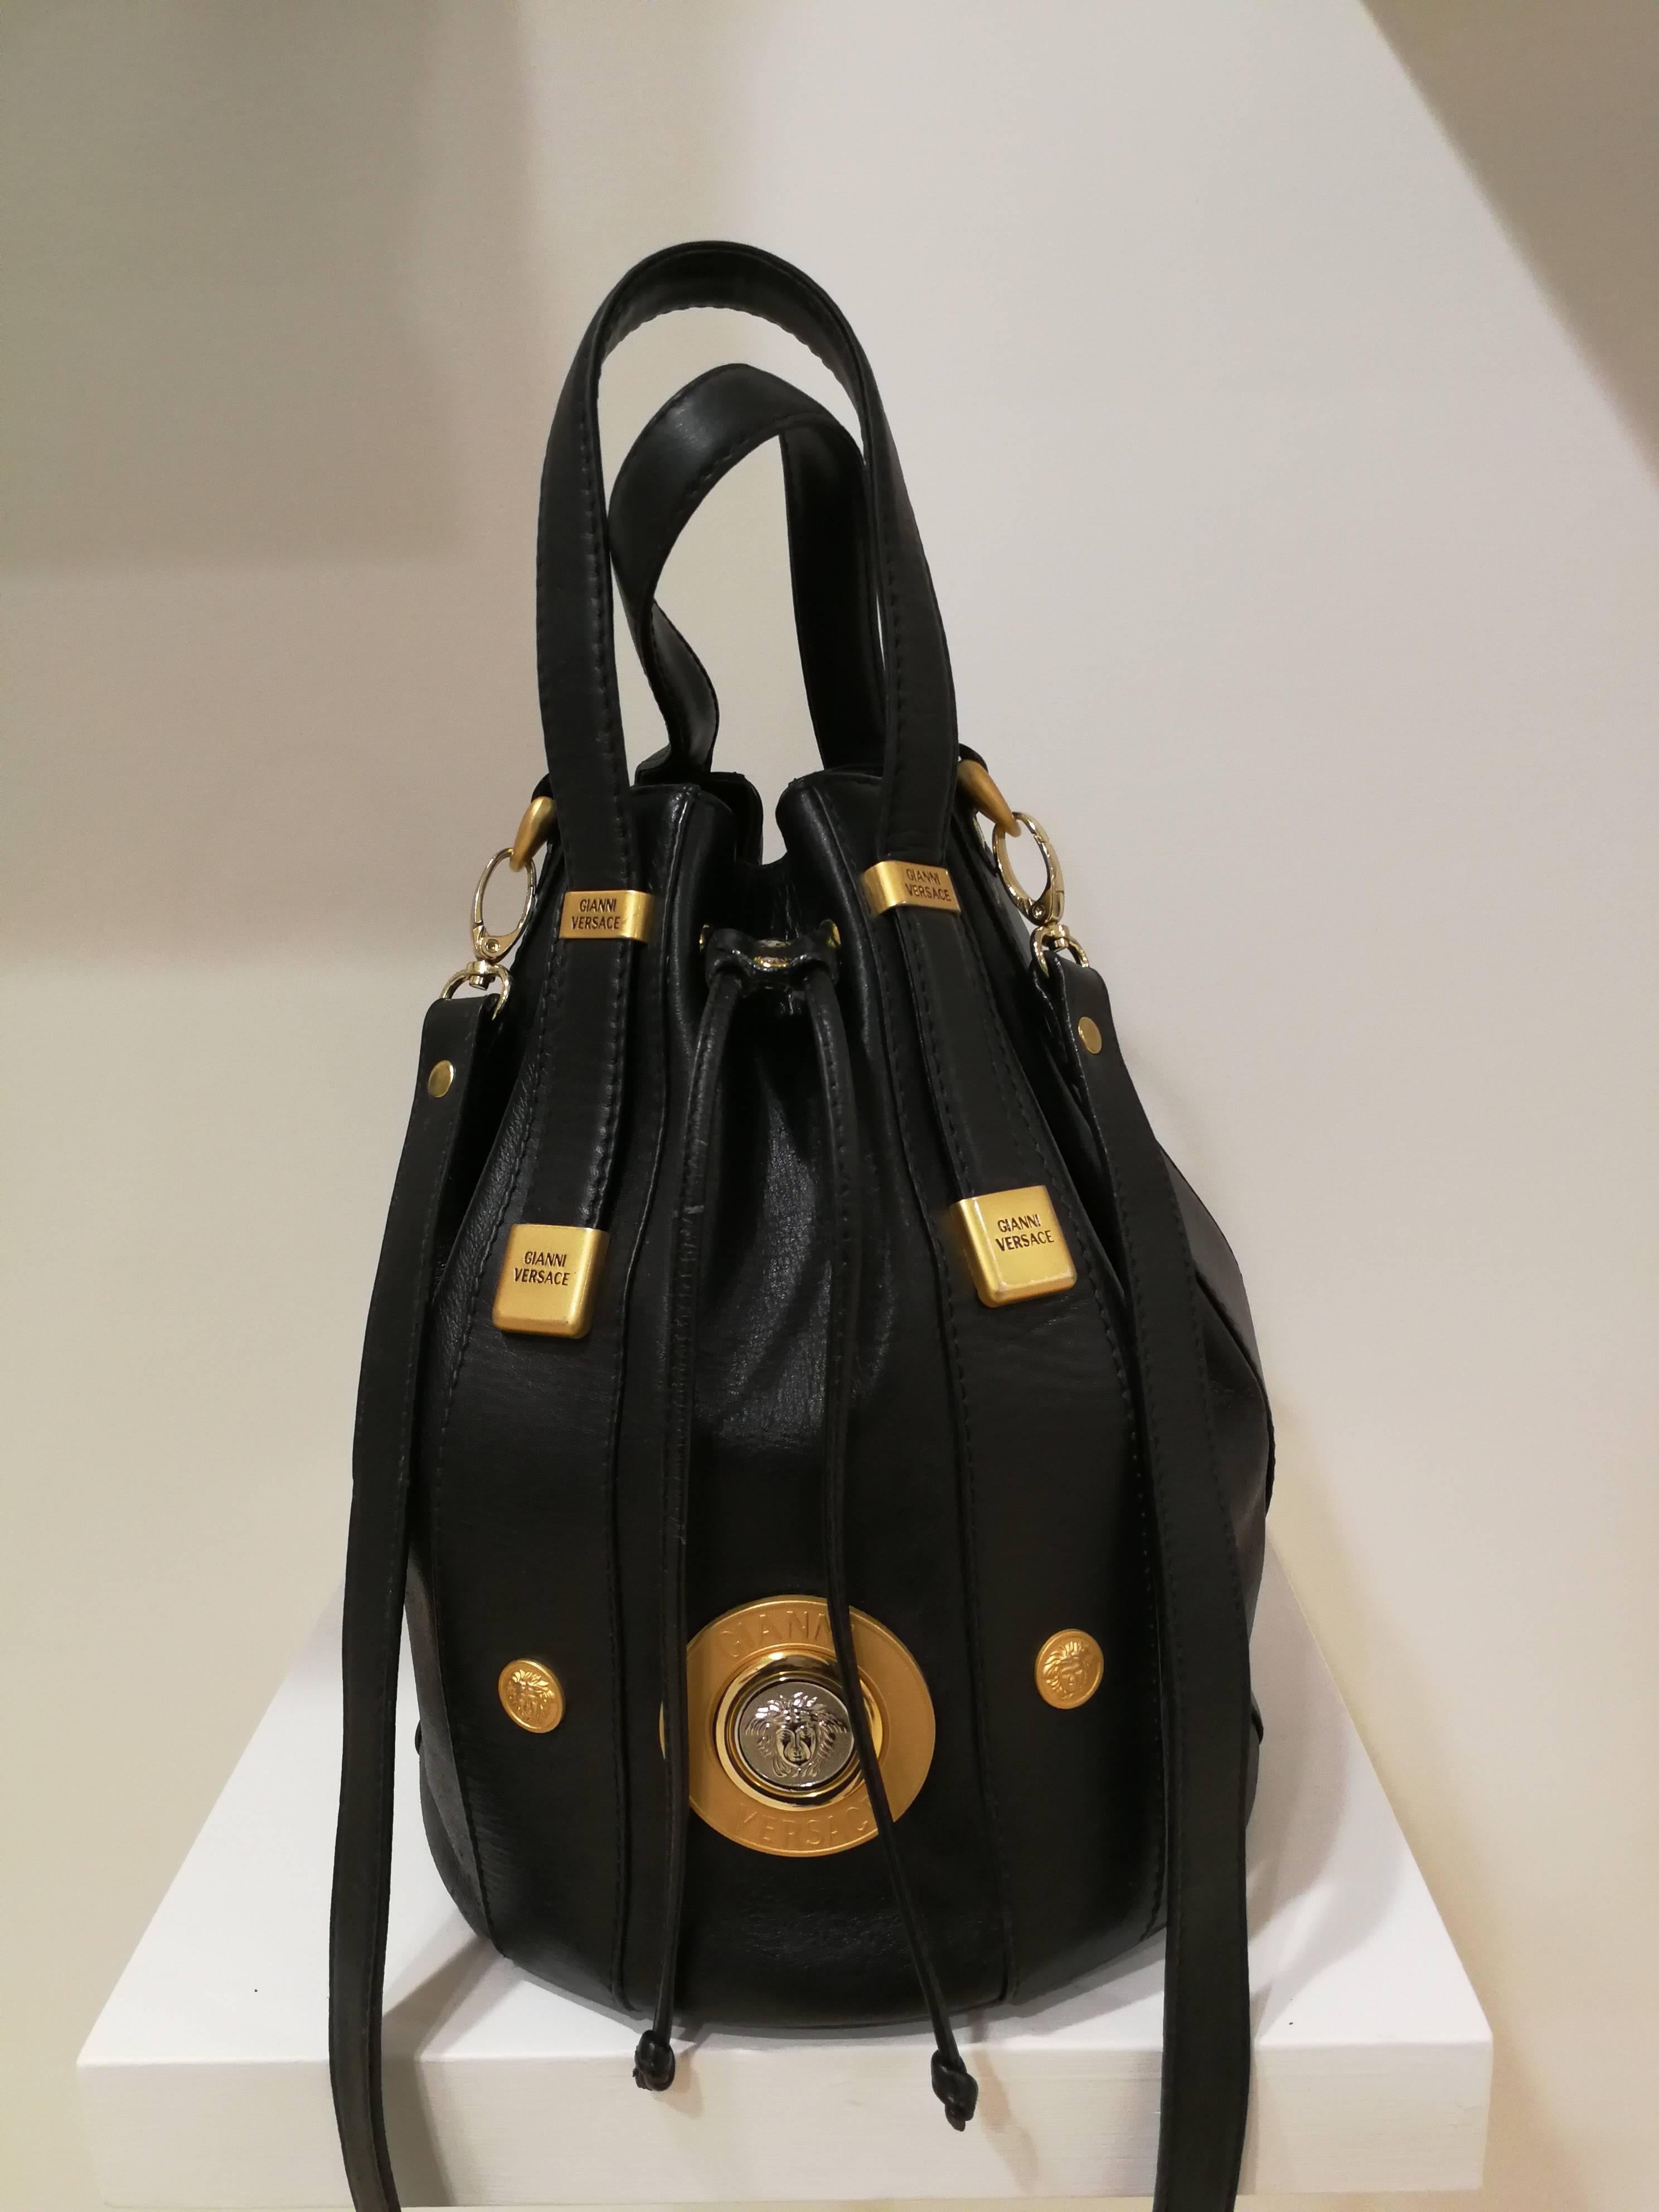 Gianni Versace Black leather Gold and Silver Tone Studs Satchel - Shoulder Bag

Unique Satchel from the 1990s
Can be used as a crossbody shoulder bag too as it comes with shoulder strap too
Gold silver tone medusa on the front
Totally made in italy 